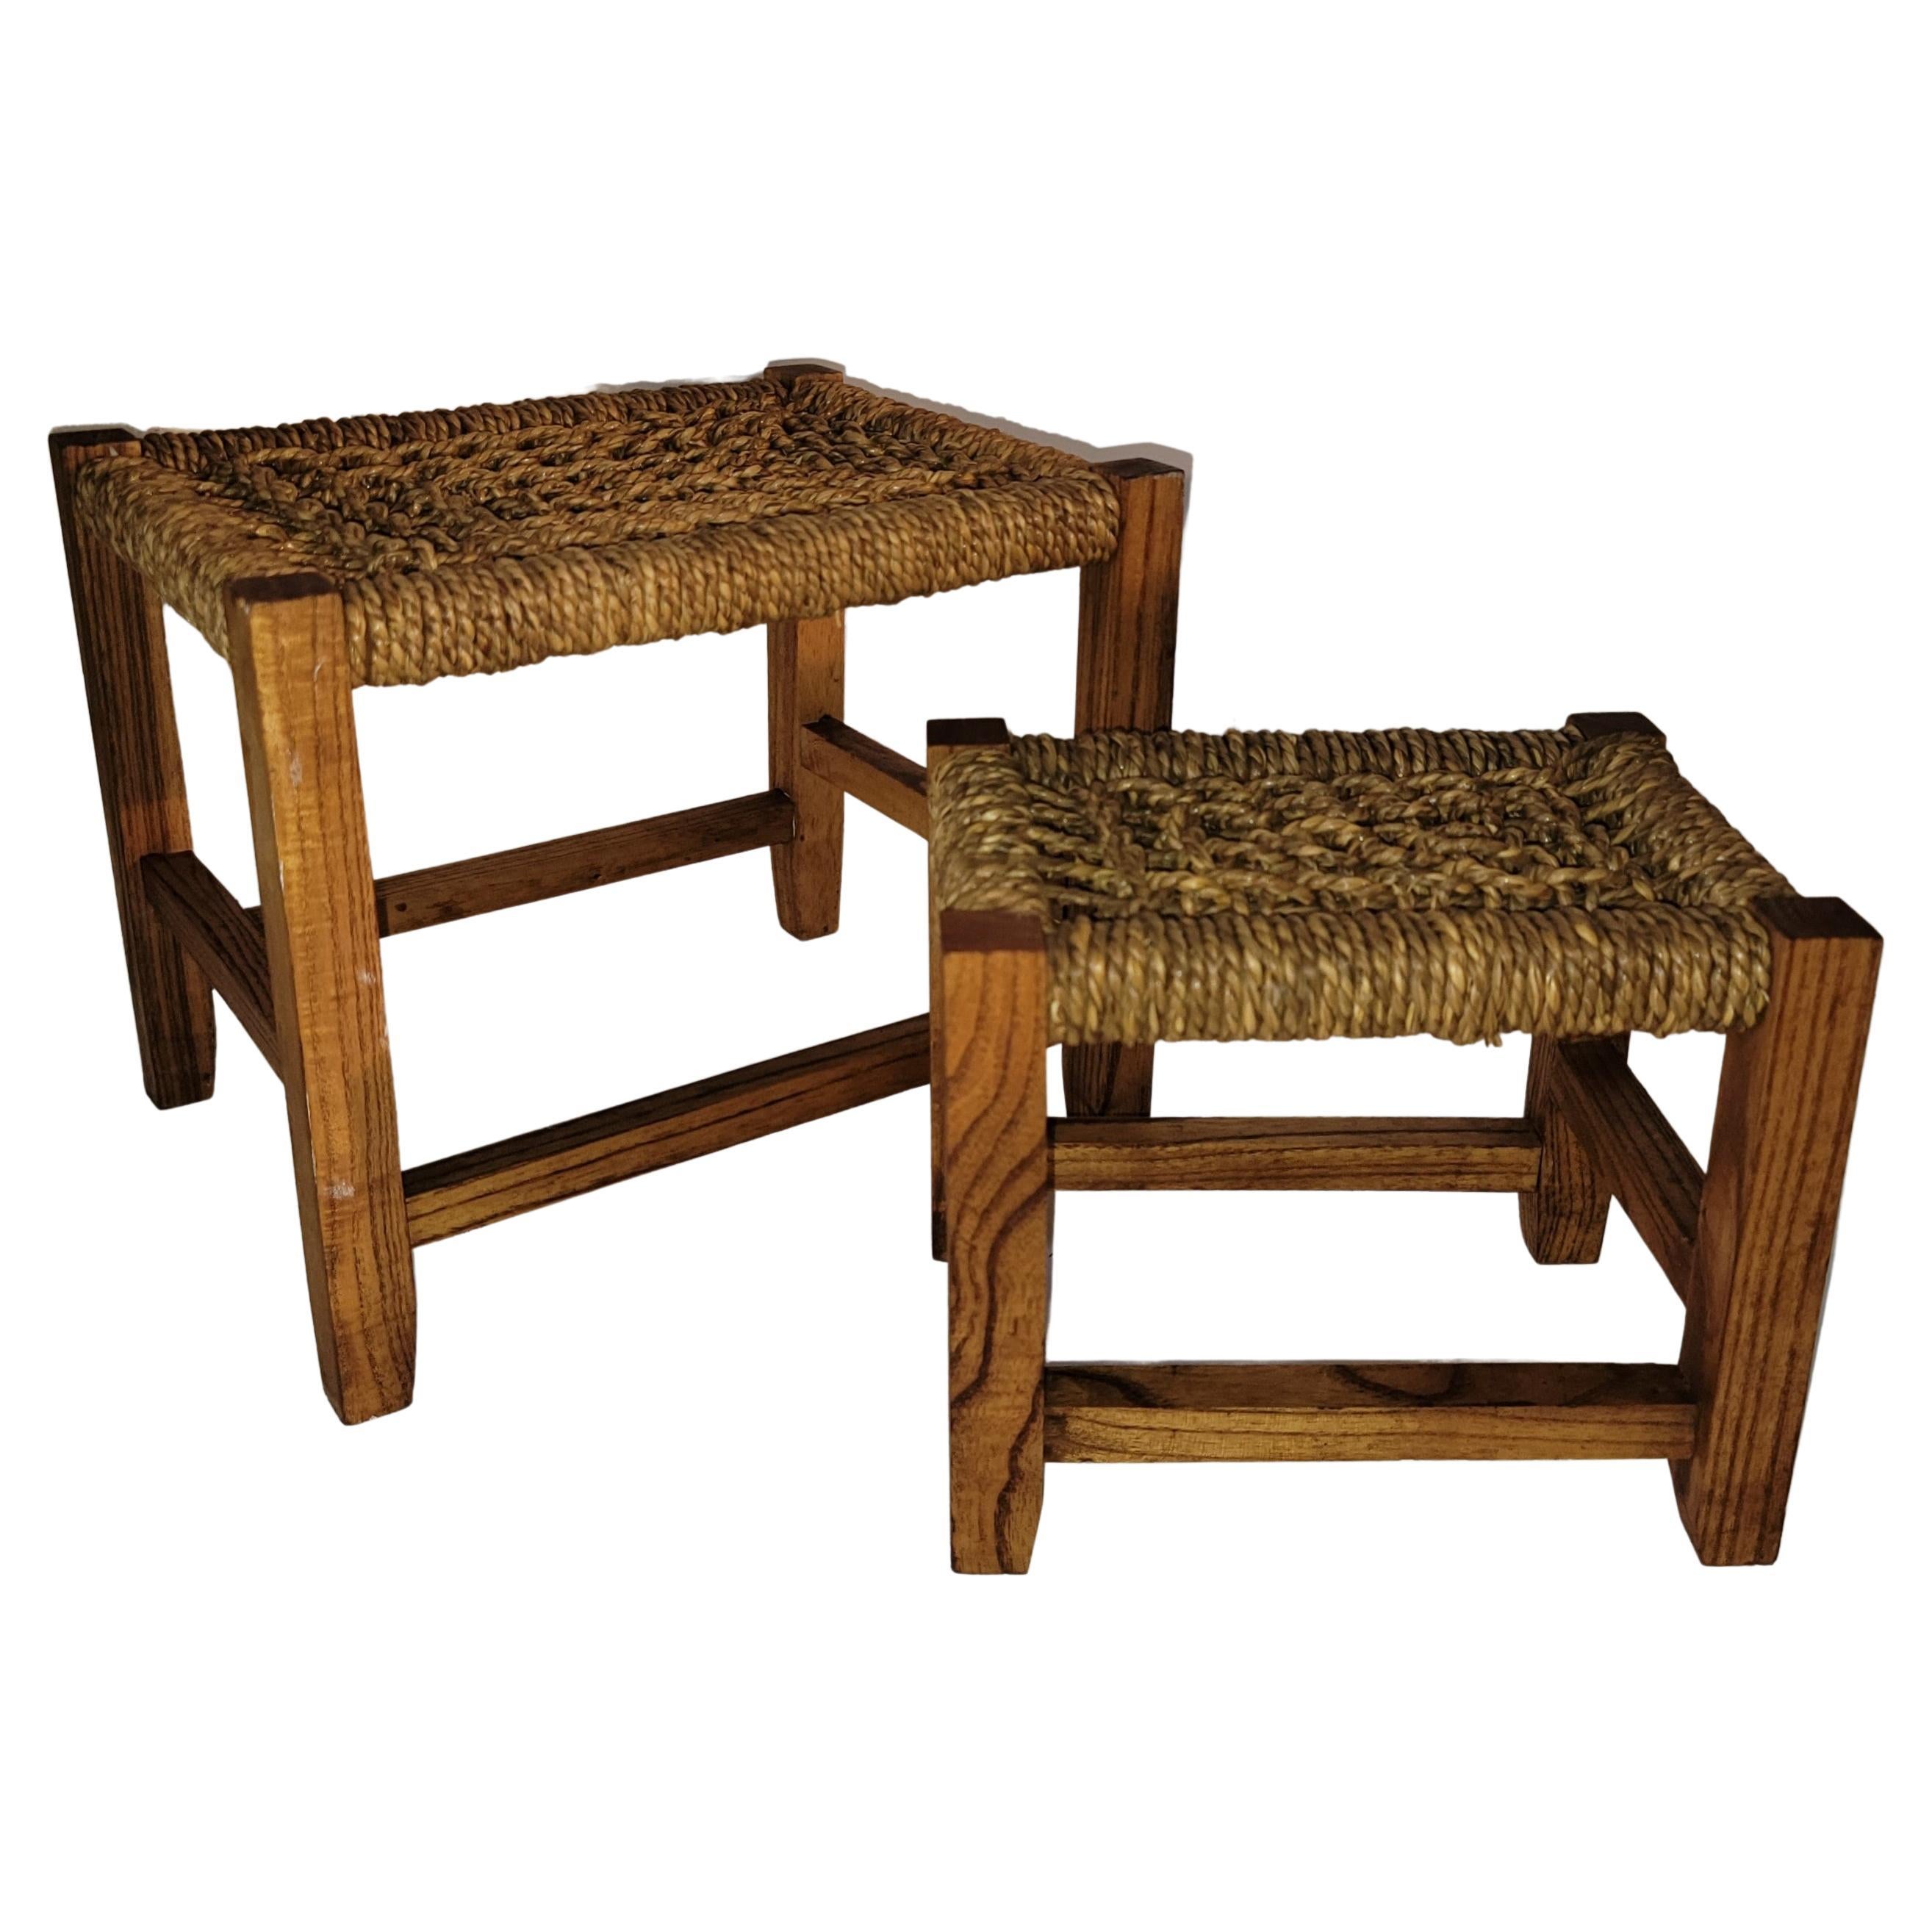 American Seagrass Footstool - Pair For Sale